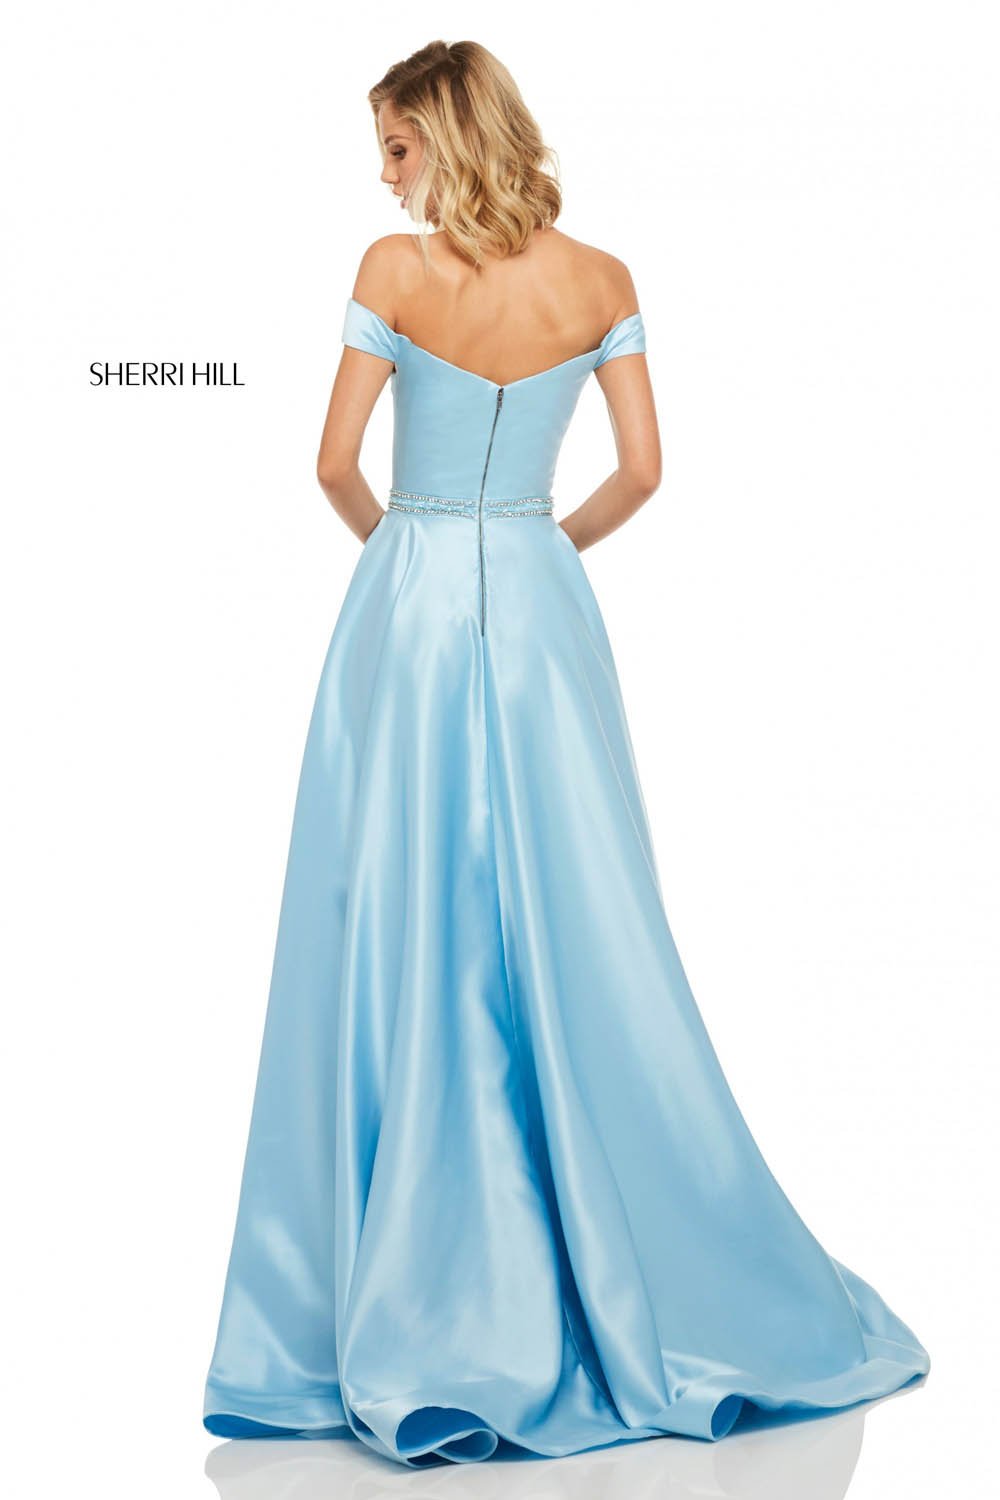 Sherri Hill 52332 dress images in these colors: Black, Ivory, Red, Emerald, Royal, Wine, Yellow, Light Blue, Blush.